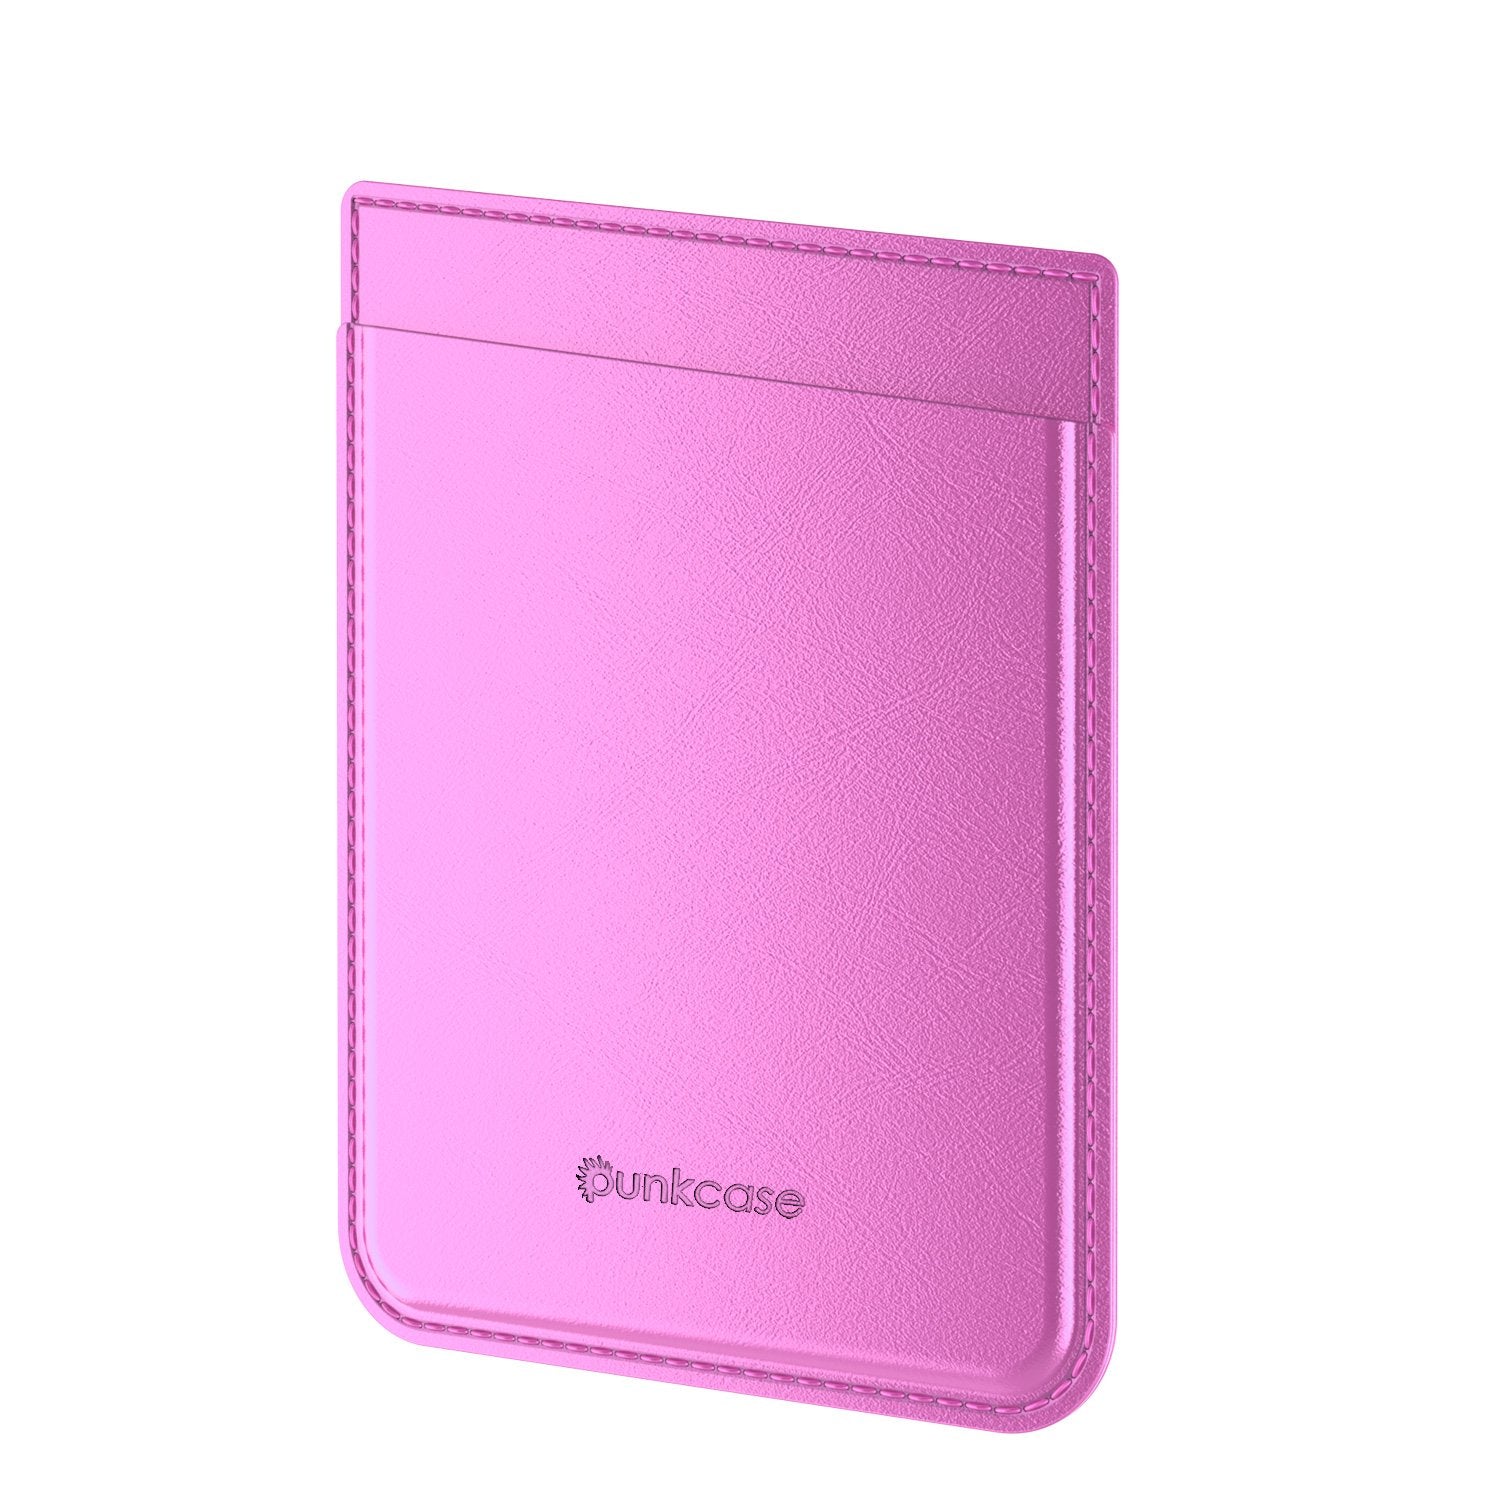 PunkCase CardStud Deluxe Stick On Wallet | Adhesive Card Holder Attachment for Back of iPhone, Android & More | Leather Pouch | [Pink] - PunkCase NZ